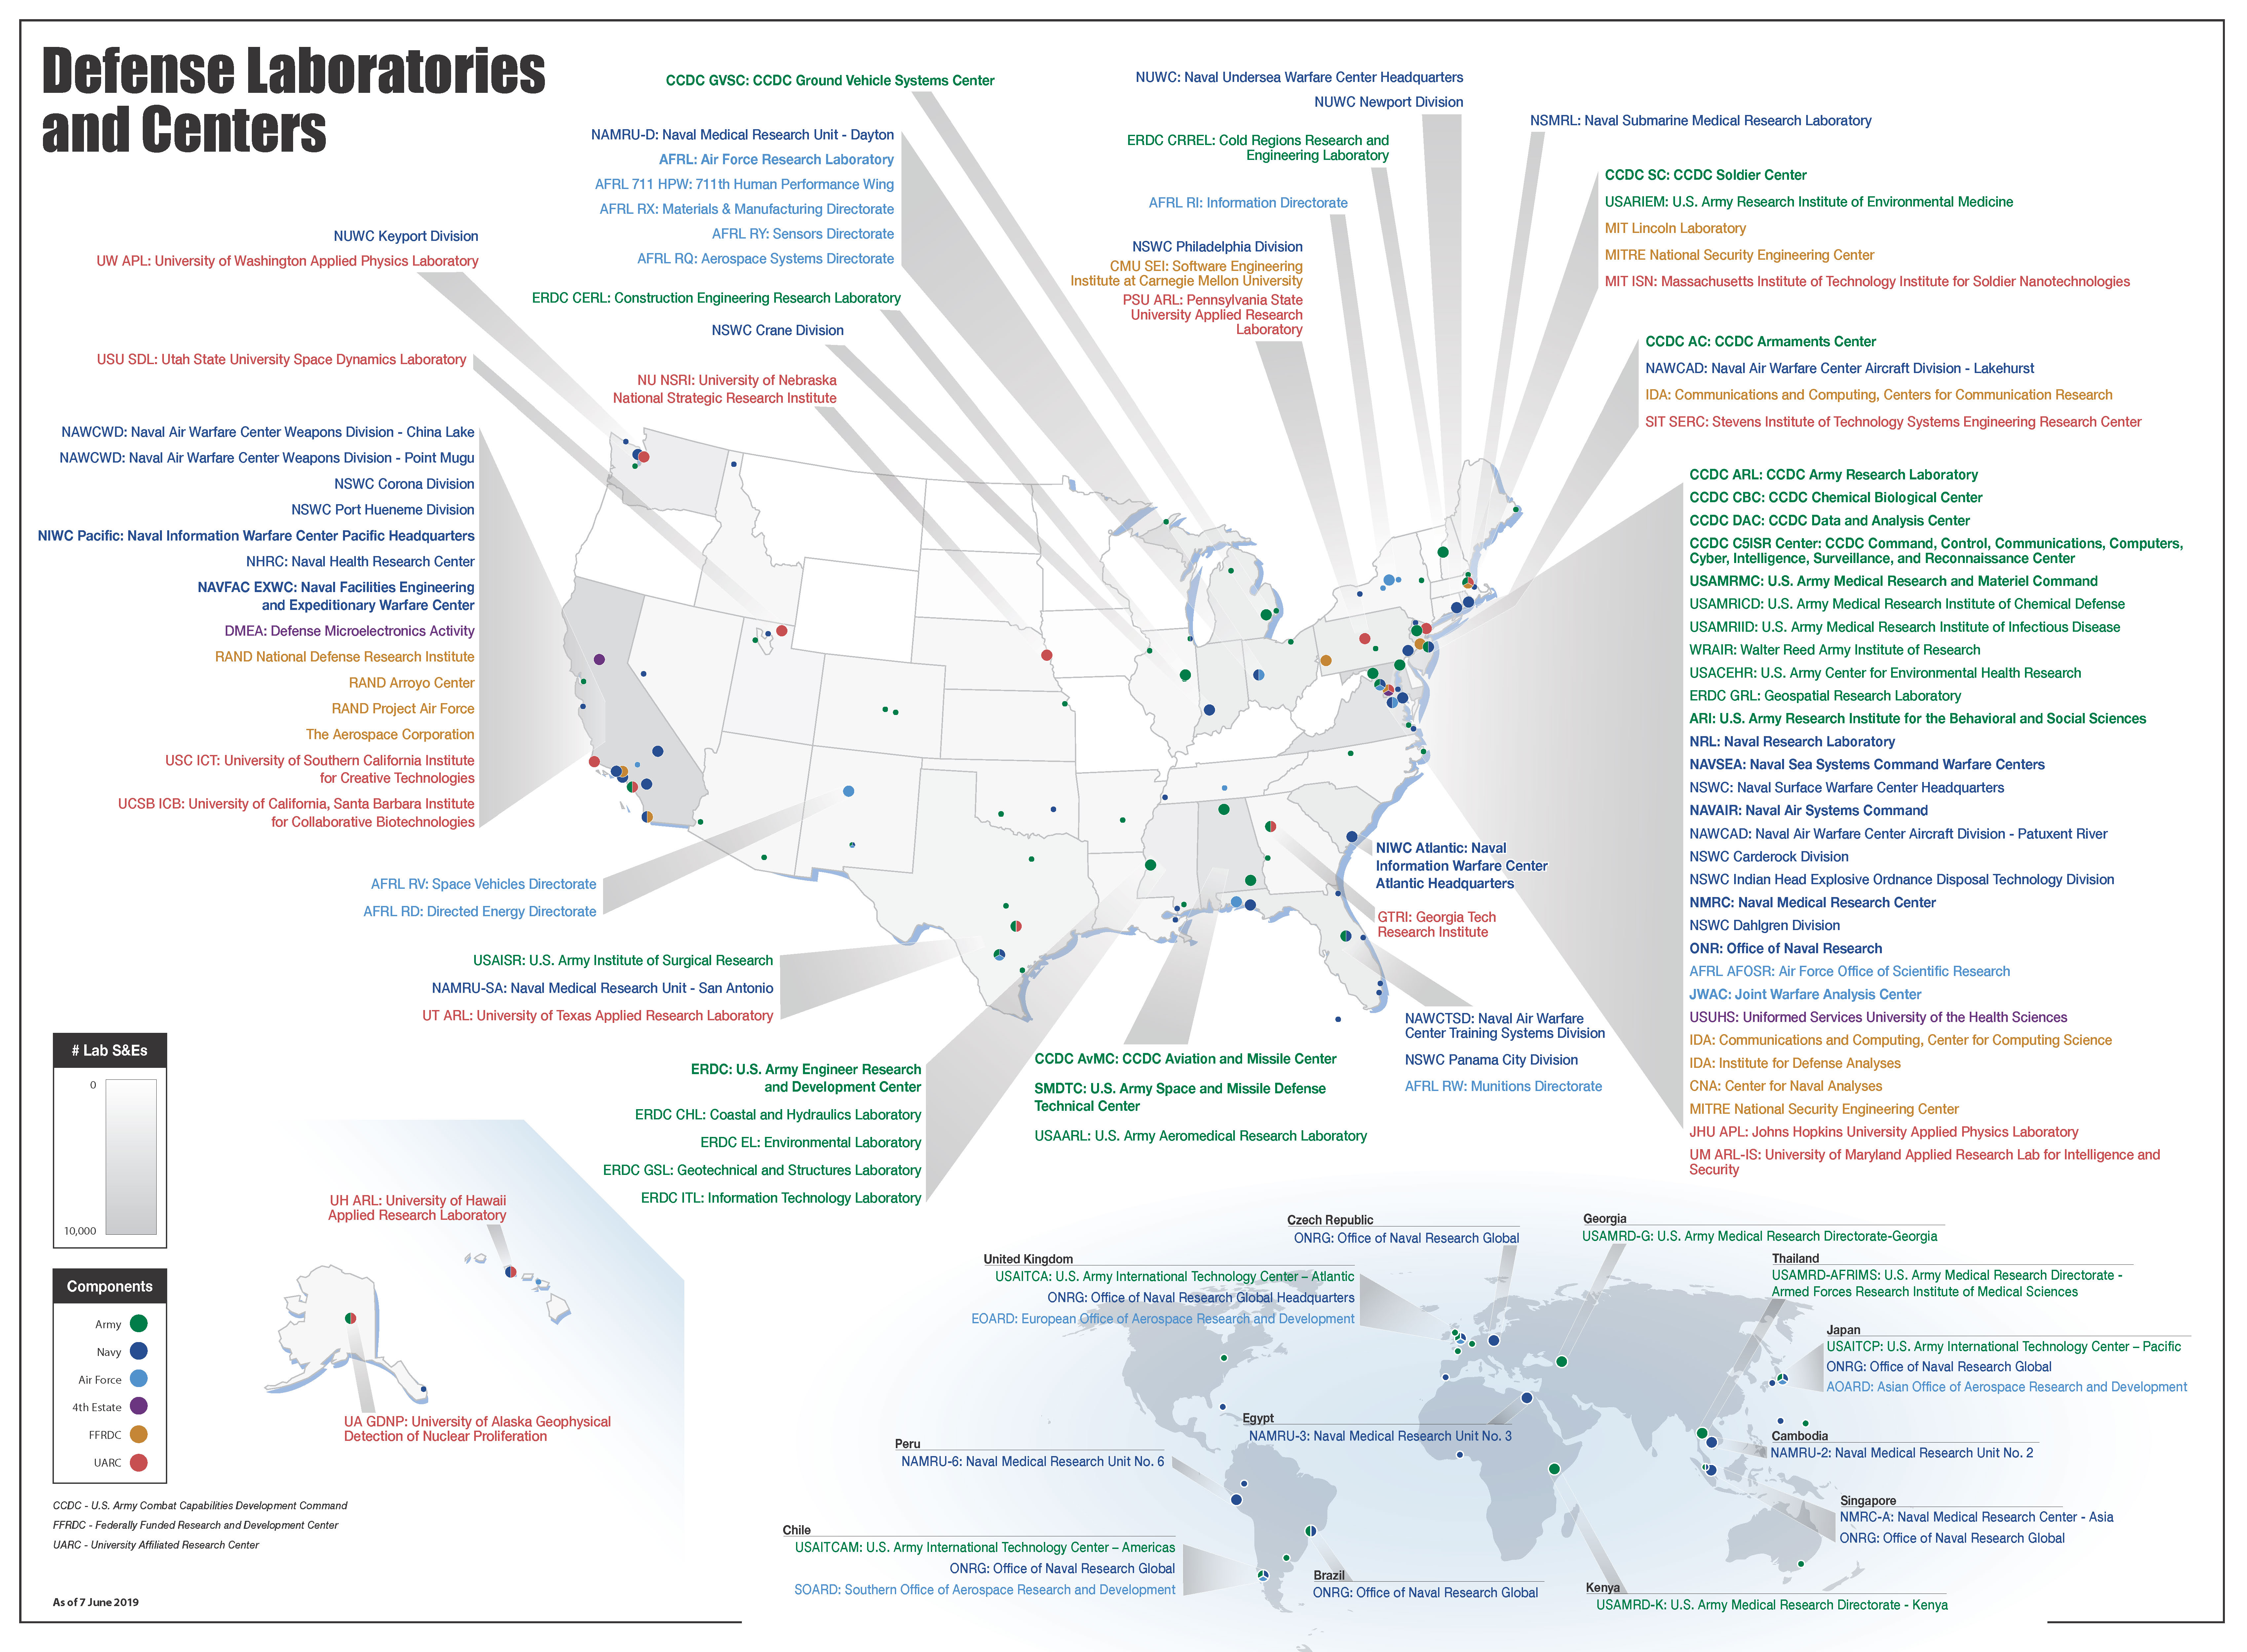 2019 DoD Laboratories and Centers Map 6-7-19_Page_1